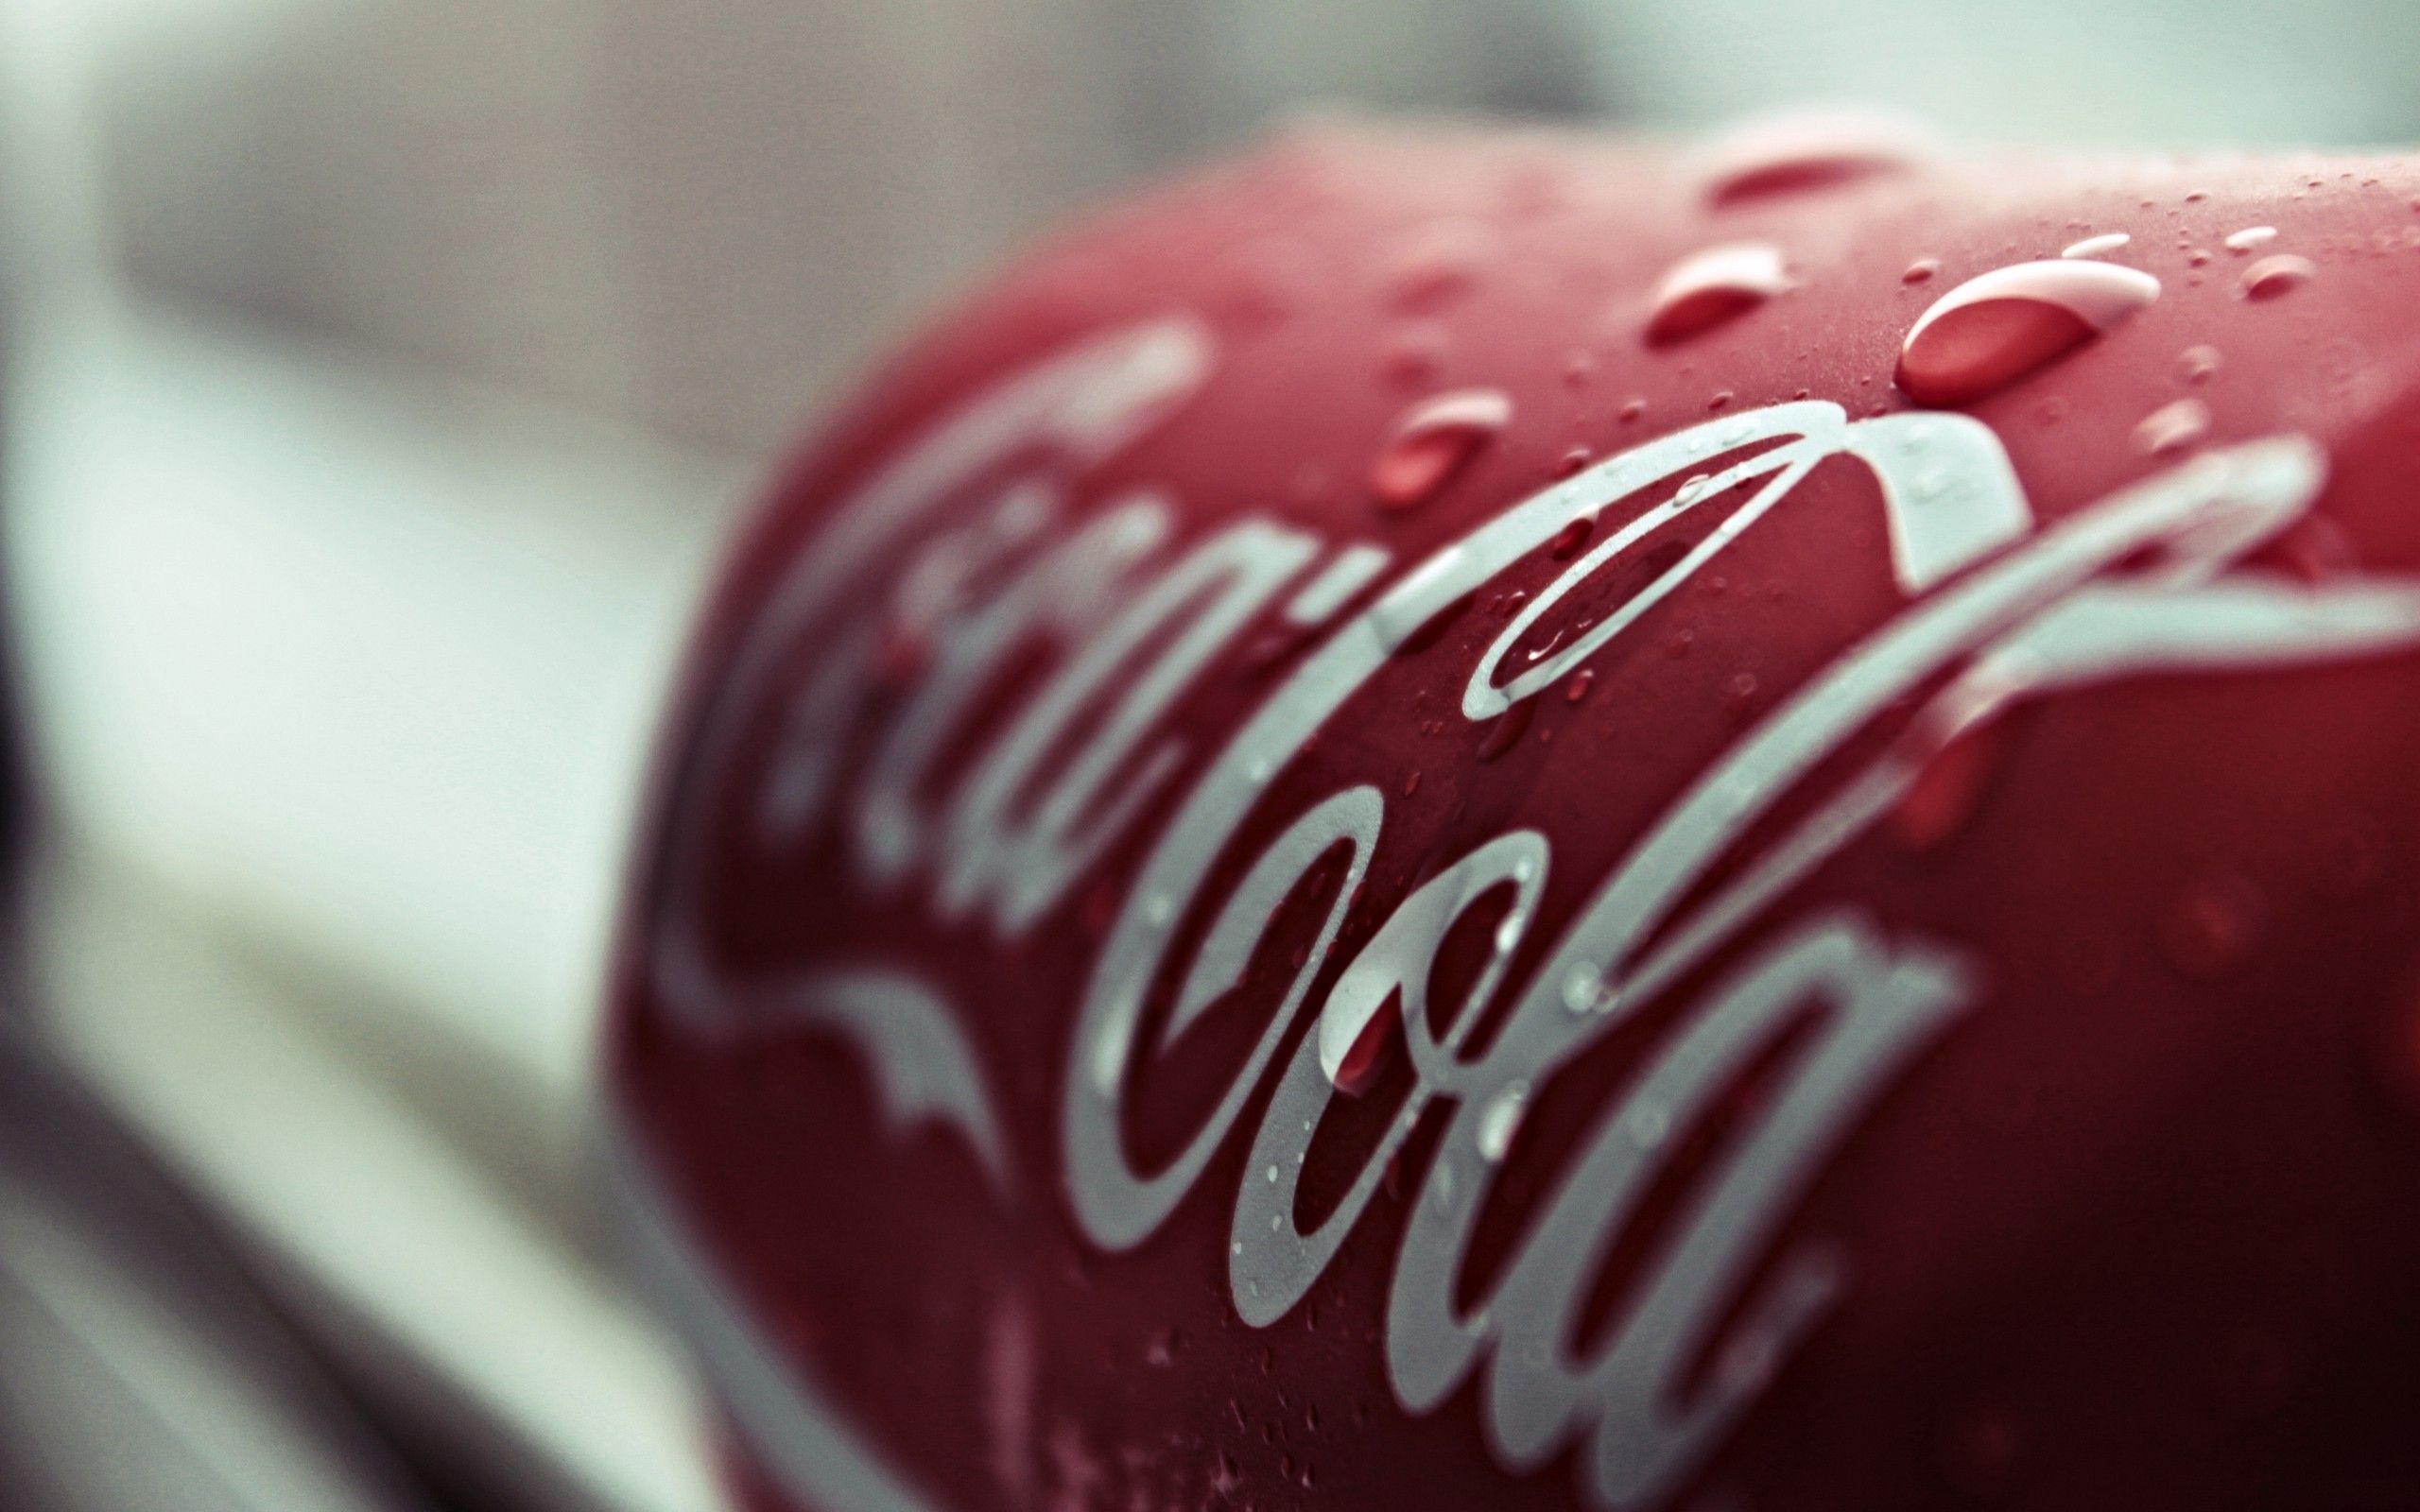 Soda wallpapers, Vibrant backgrounds, Refreshing drinks, Carbonated beverages, 2560x1600 HD Desktop